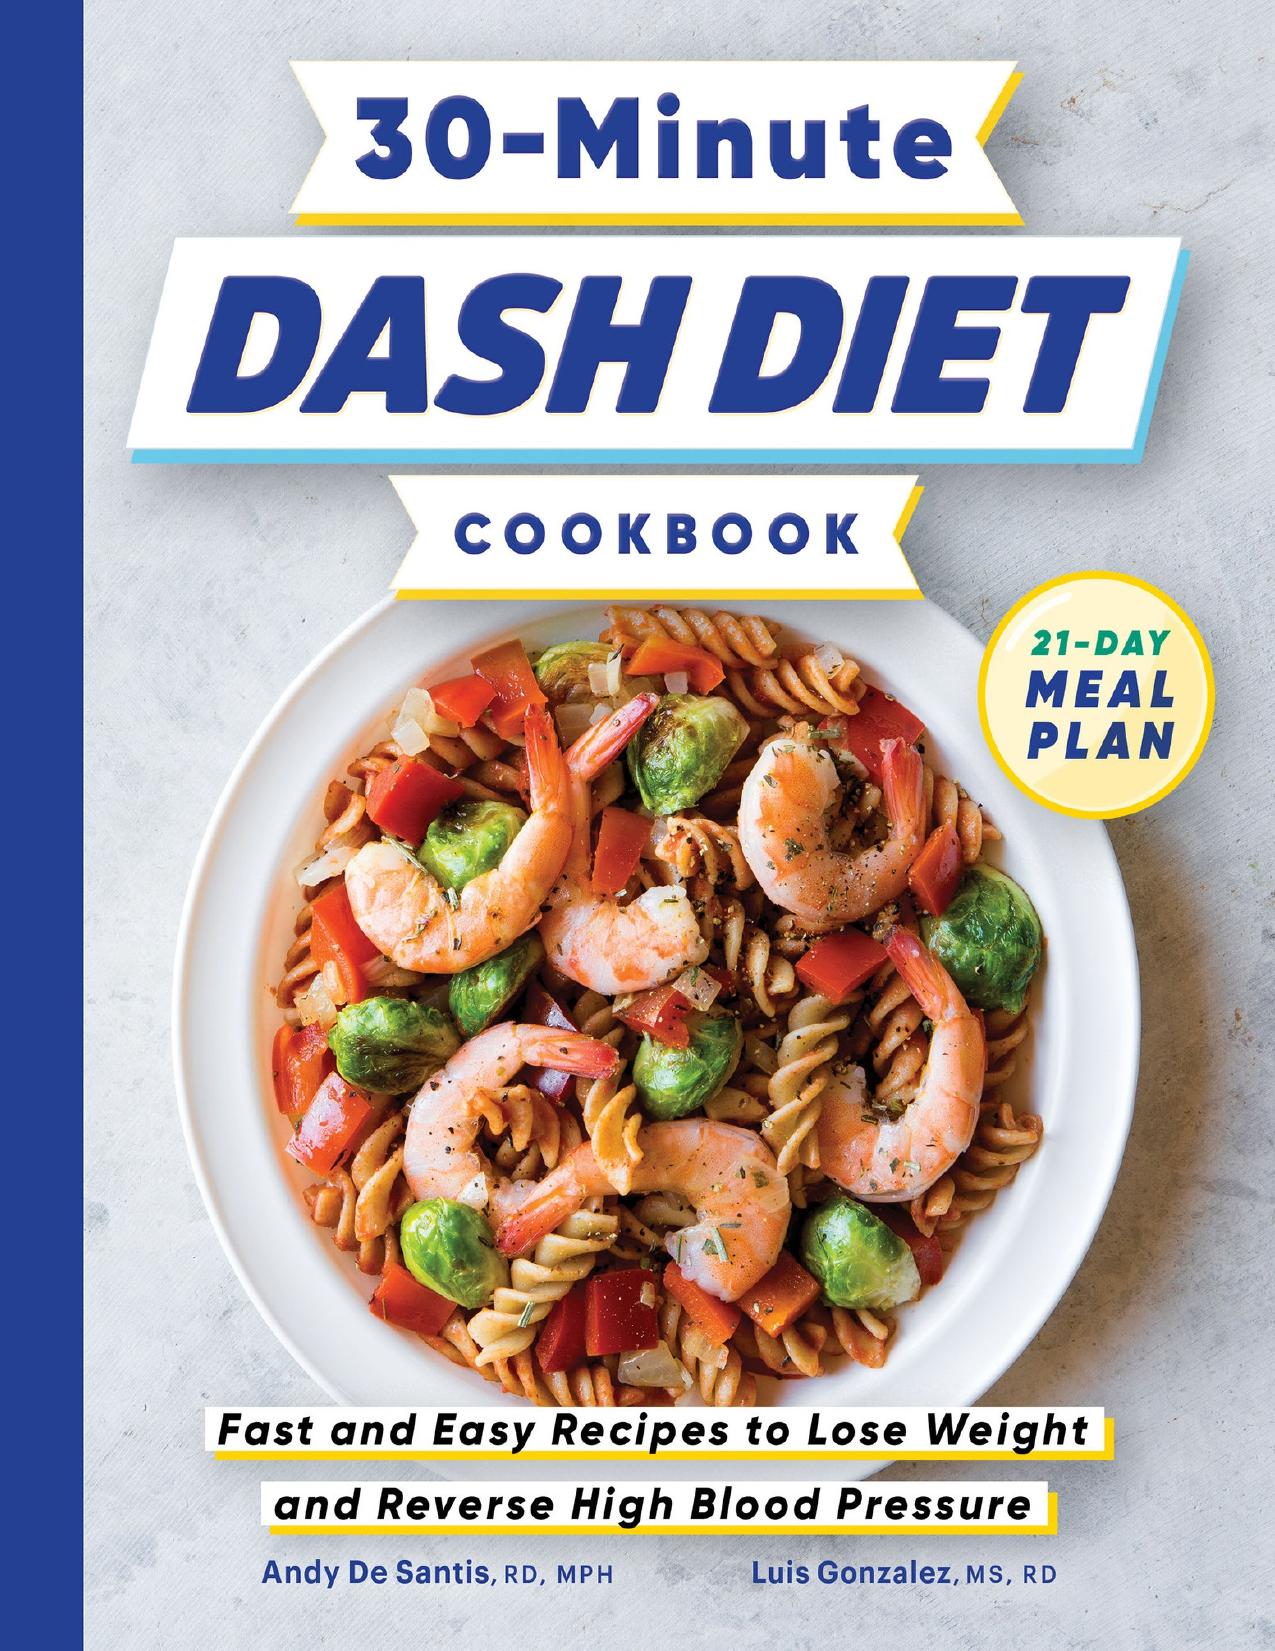 30-Minute DASH Diet Cookbook: Fast and Easy Recipes to Lose Weight and Reverse High Blood Pressure by Gonzalez MS RD Luis & De Santis RD MPH Andy